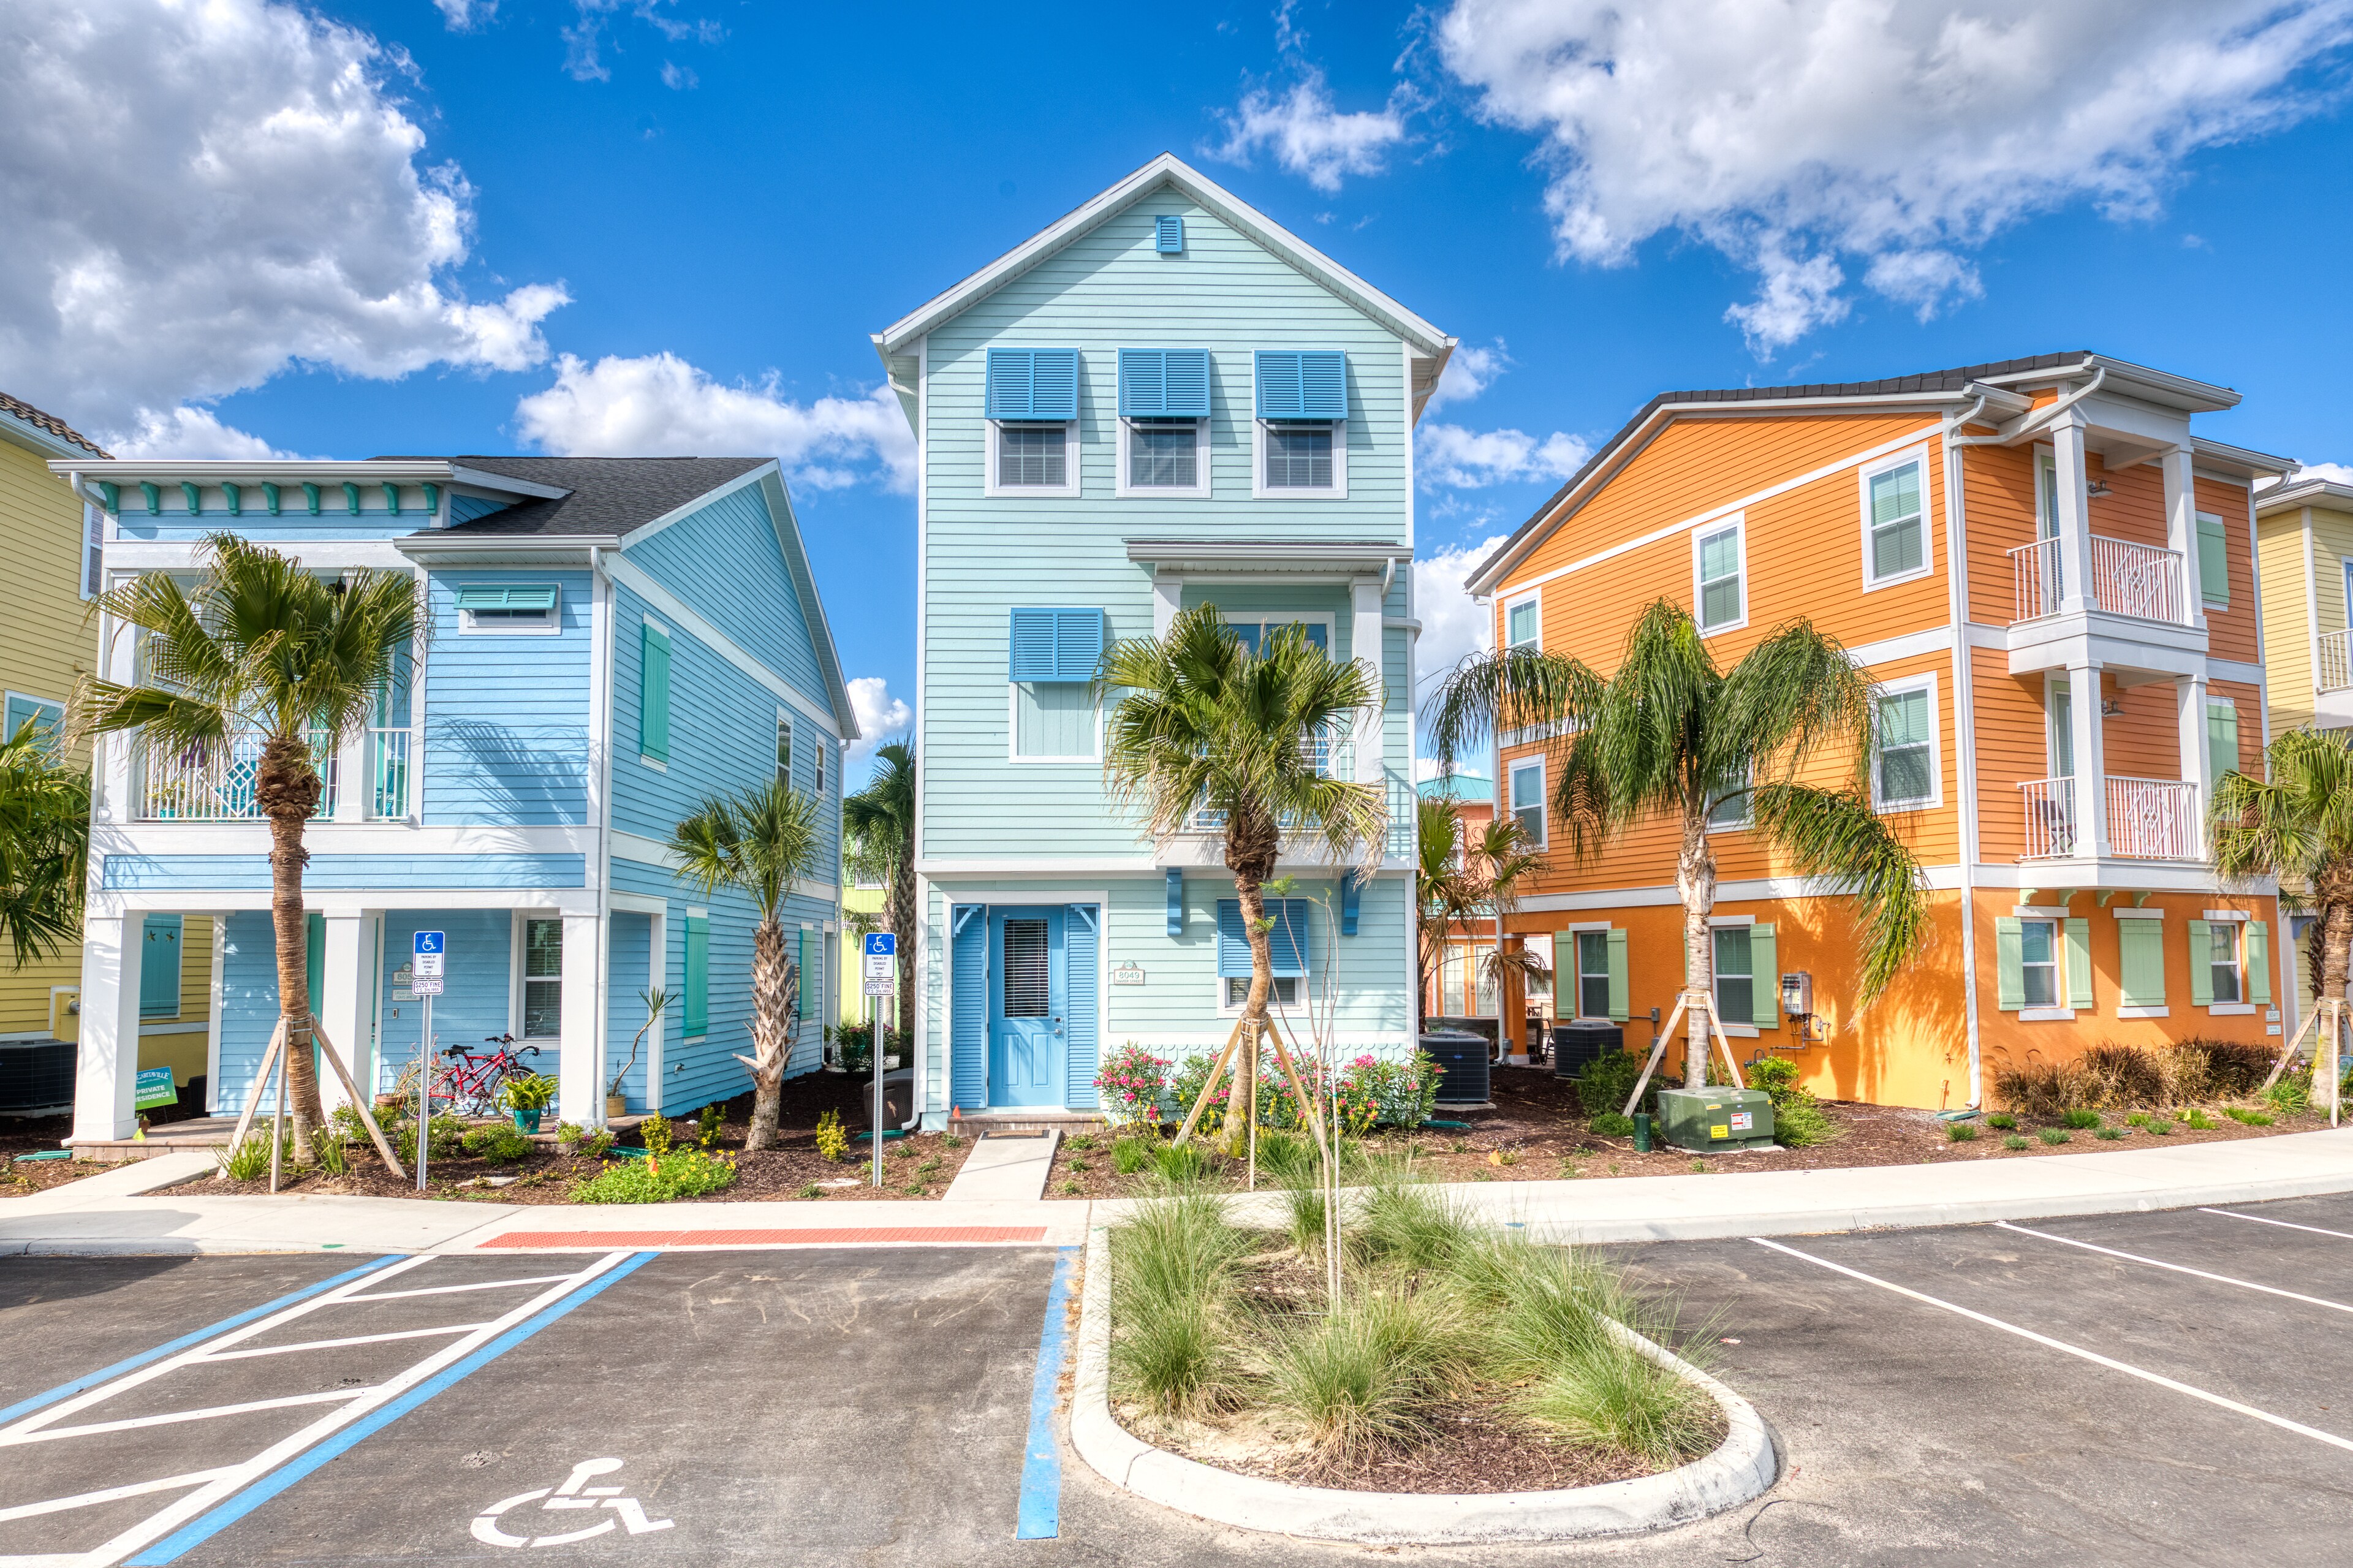 Property Image 1 - Blue Oasis near Disney with Margaritaville Resort Access - 8049SH